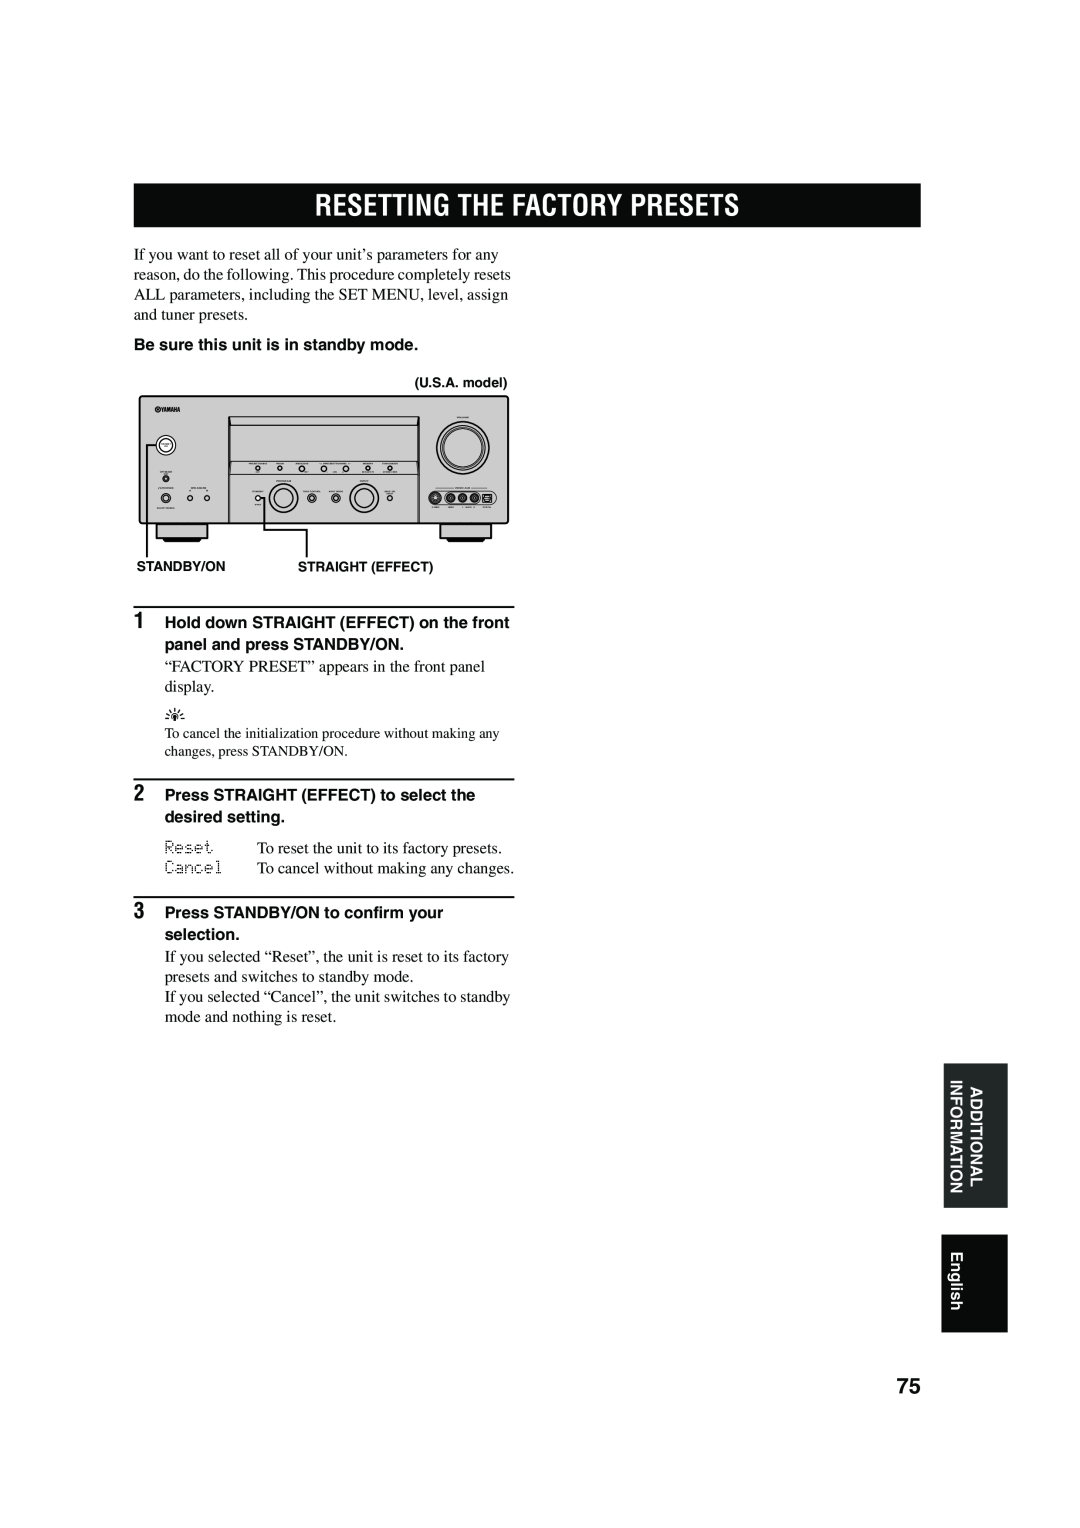 Yamaha HTR-5760 owner manual Resetting The Factory Presets, Be sure this unit is in standby mode 